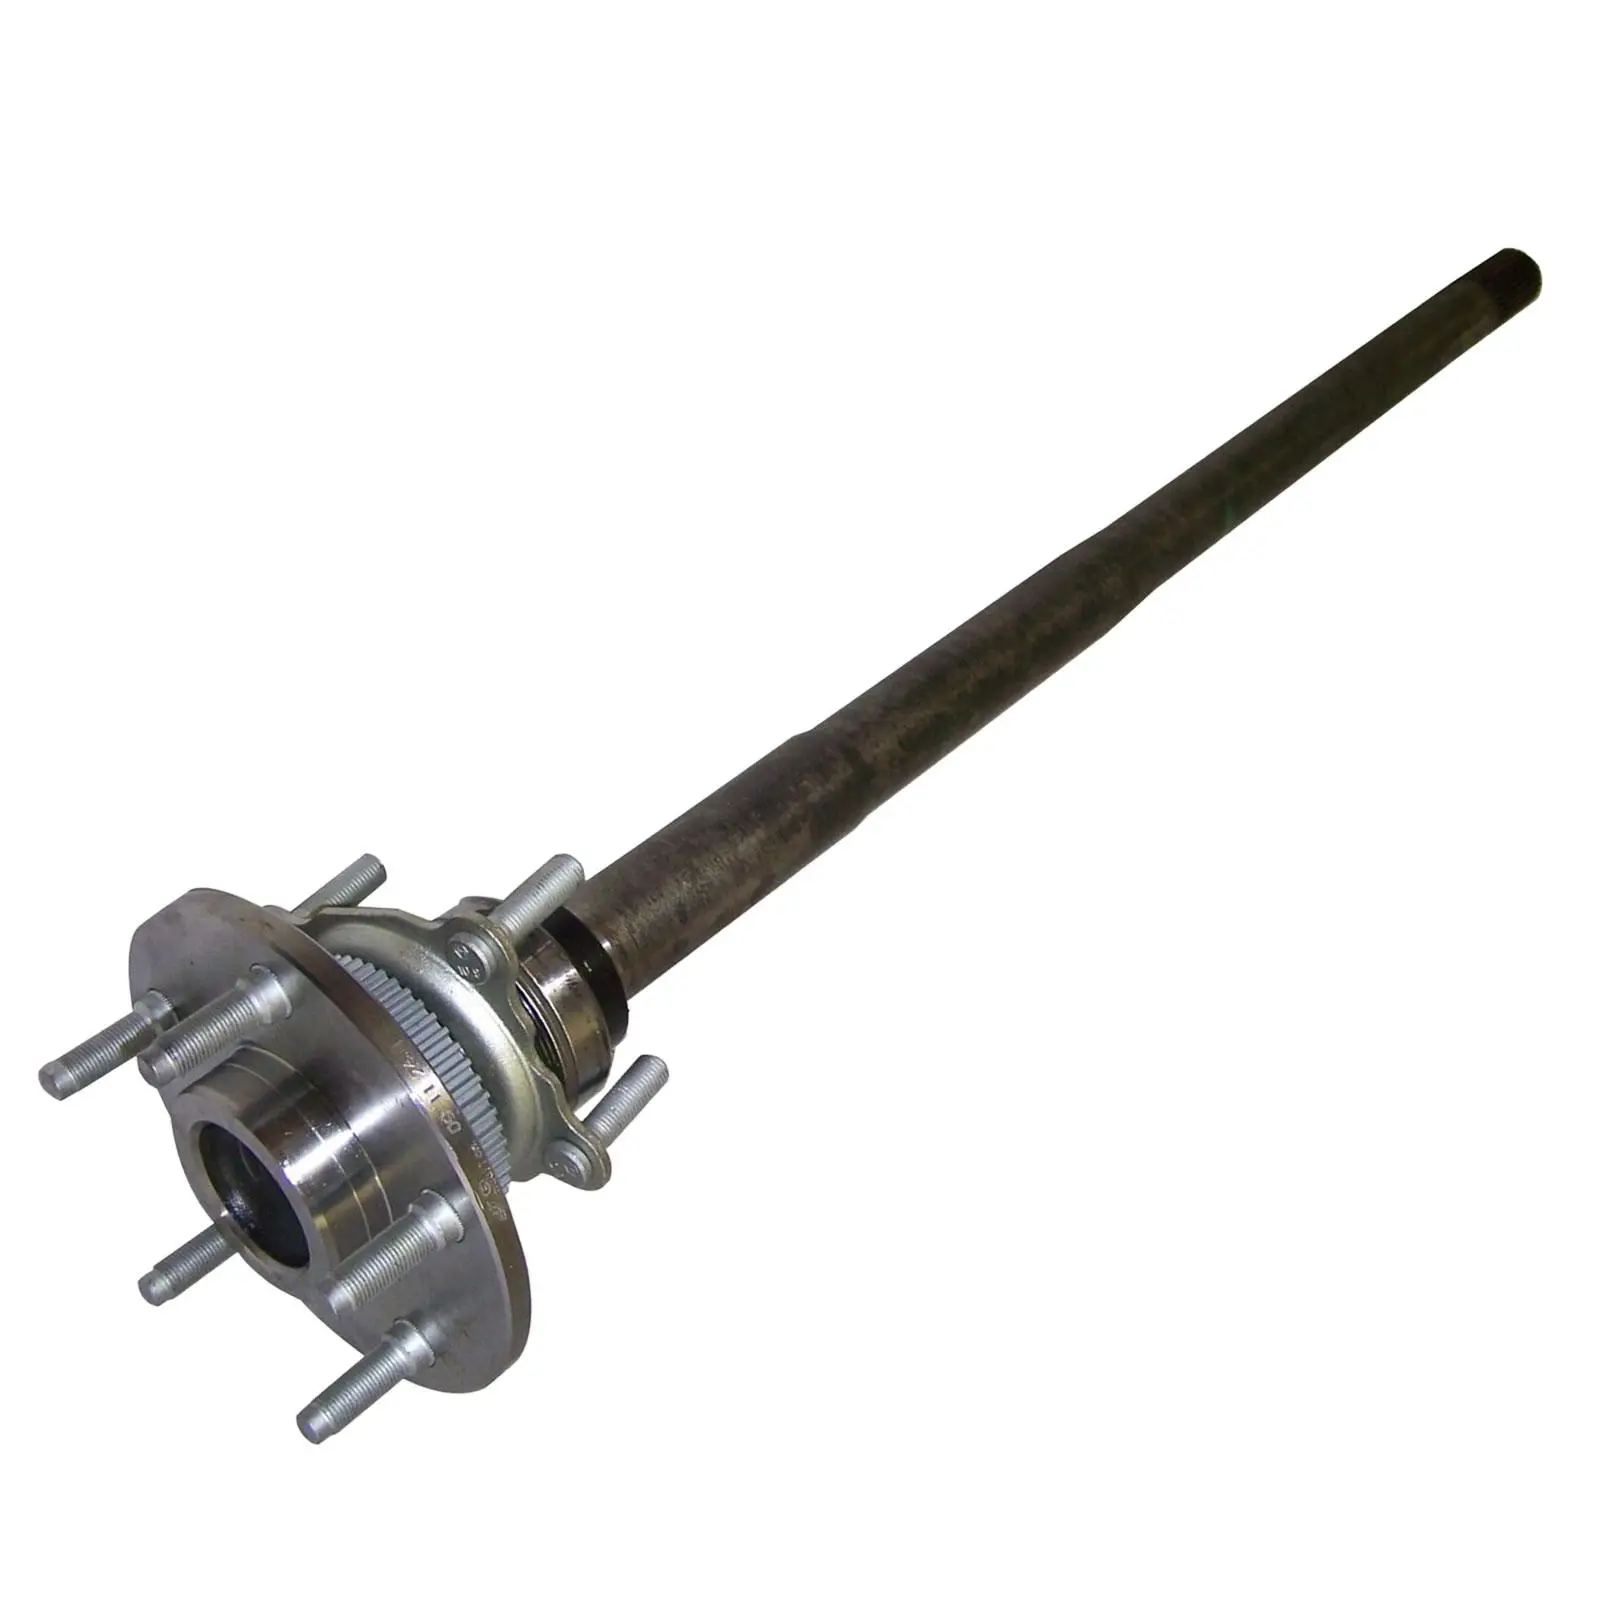 Rear Axle Shaft Assembly Replacement Repair Parts for Jeep Wrangler JK Durable Auto Accessories Easily to Install